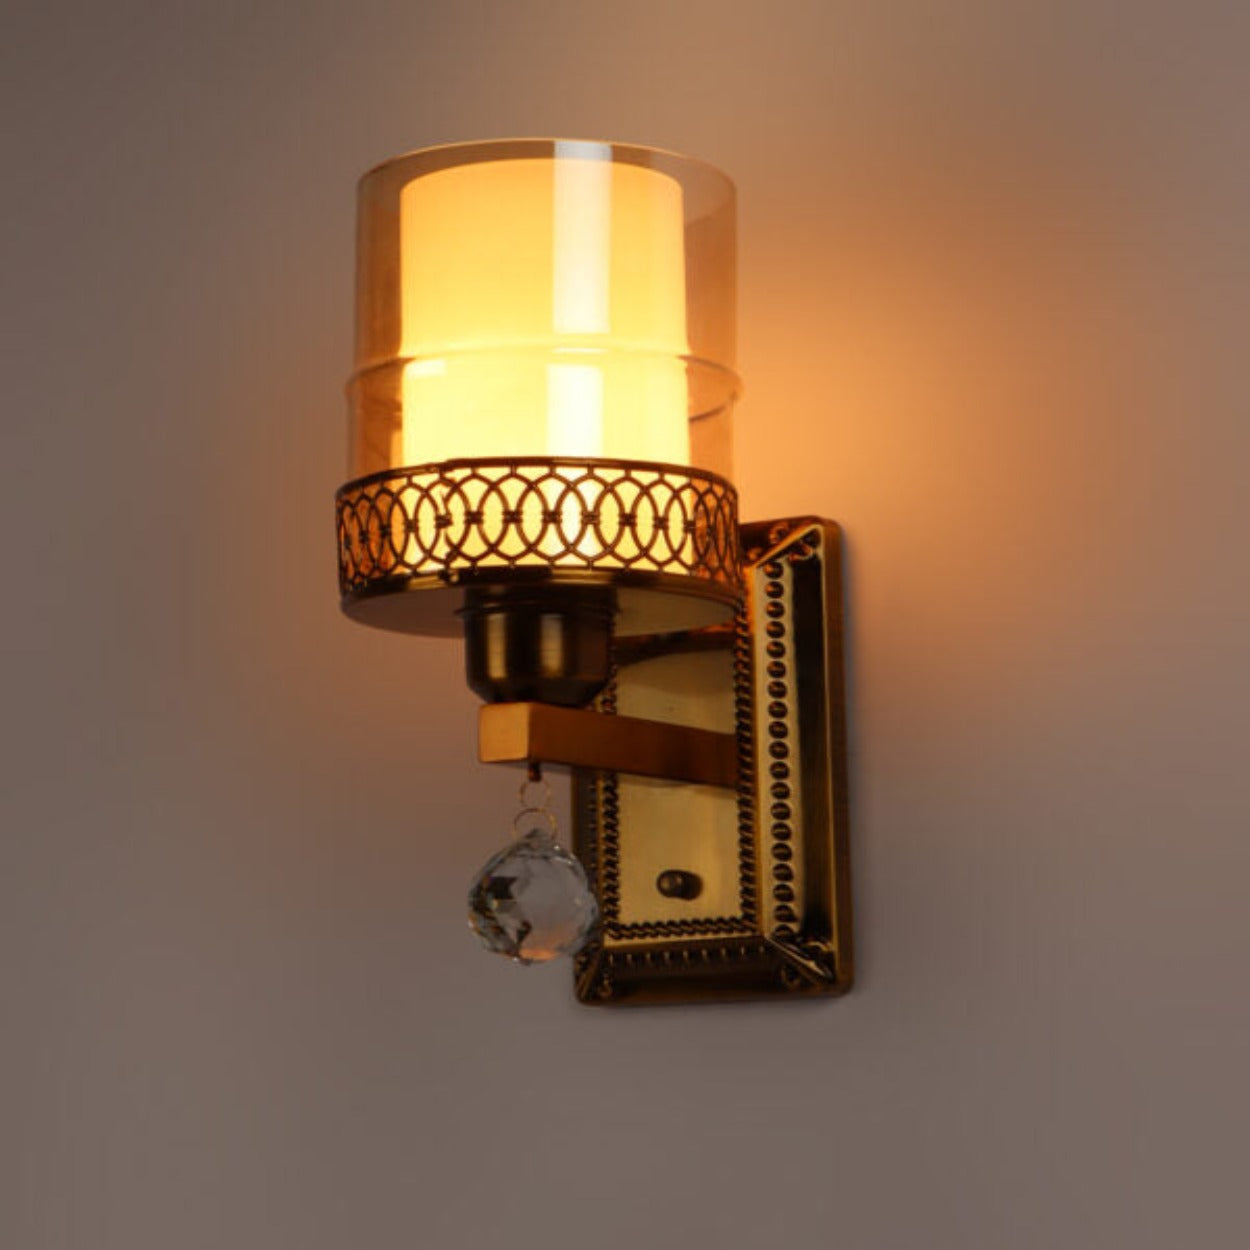 ANKUR VICTORIAL BEAD ANTIQUE BRASS CLASSIC WALL LIGHT / WALL SCONCE